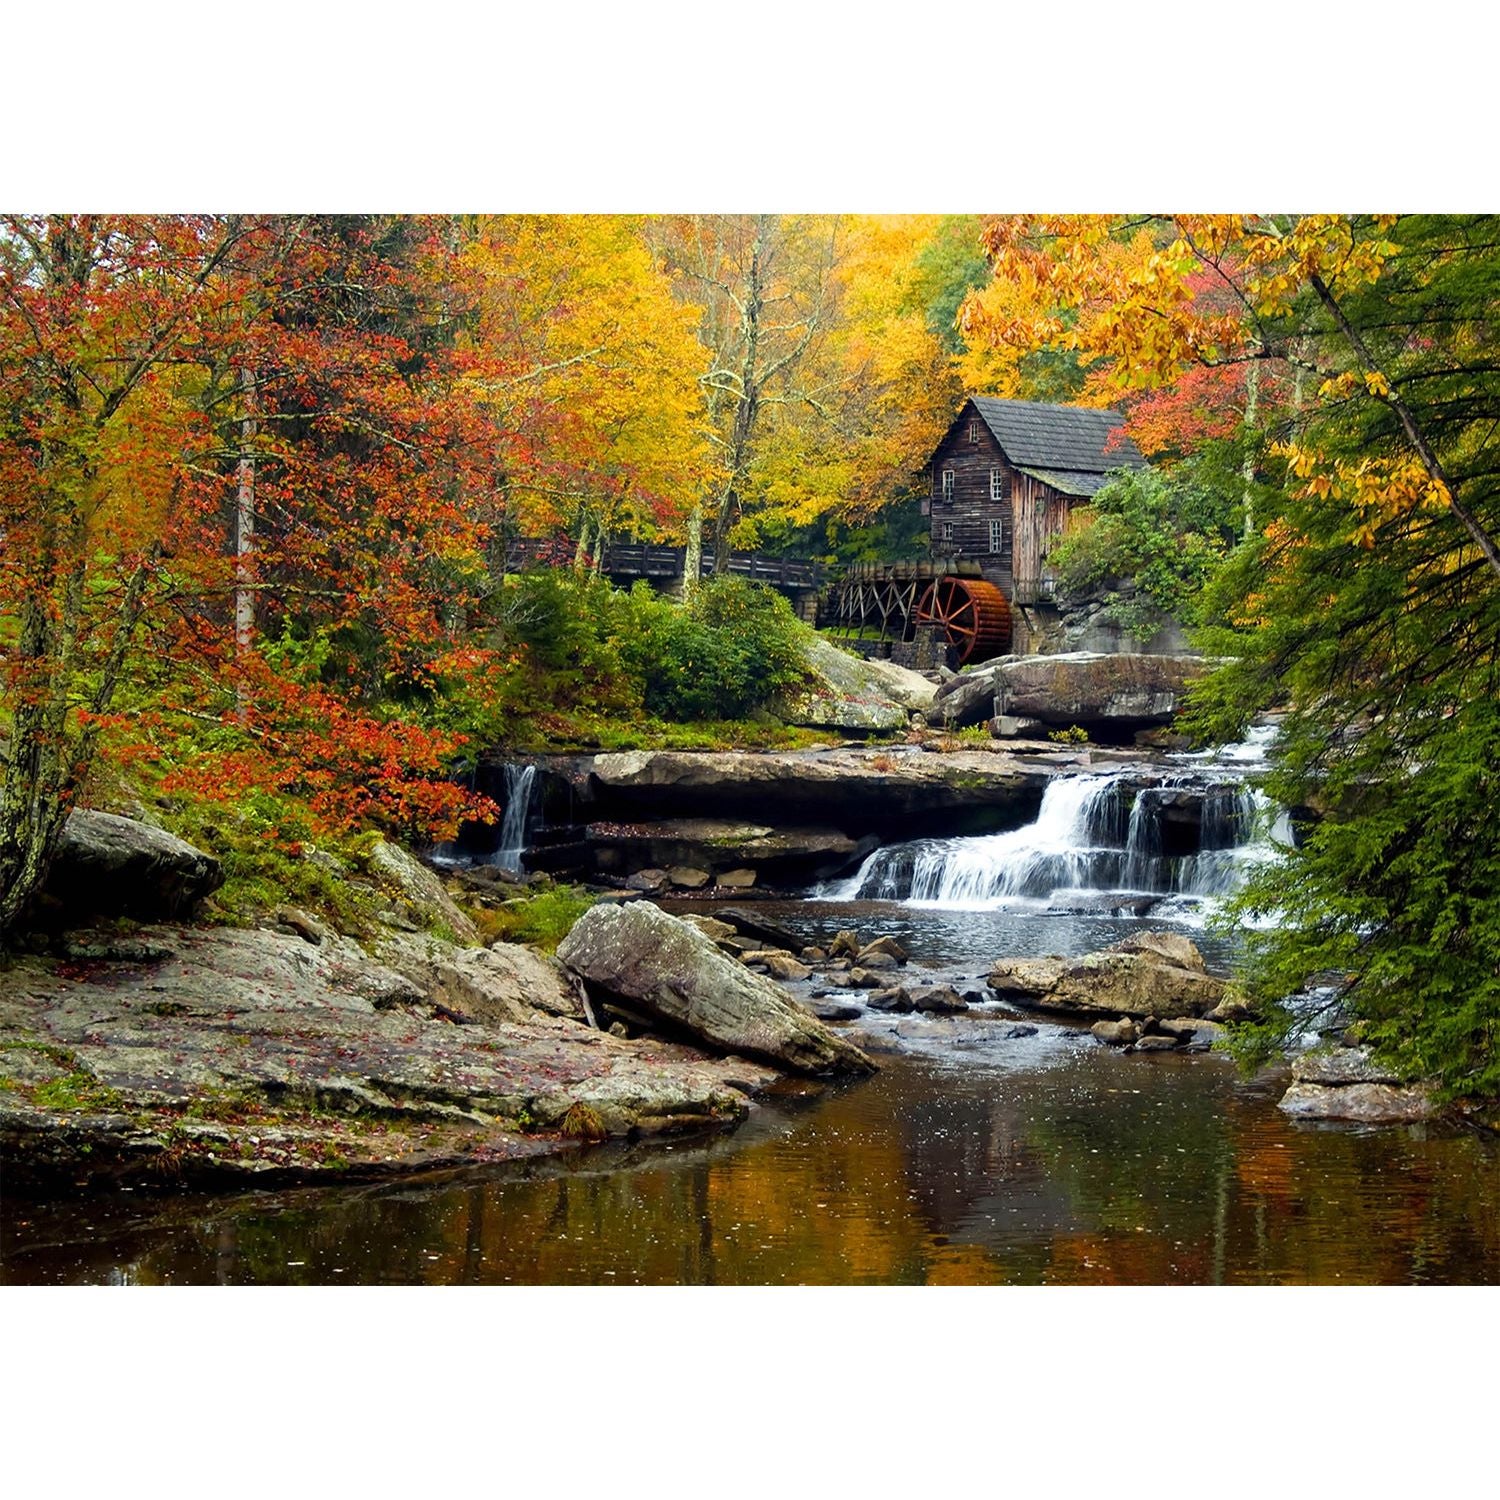 Autumn Harmony: The Old Mill and Waterfall